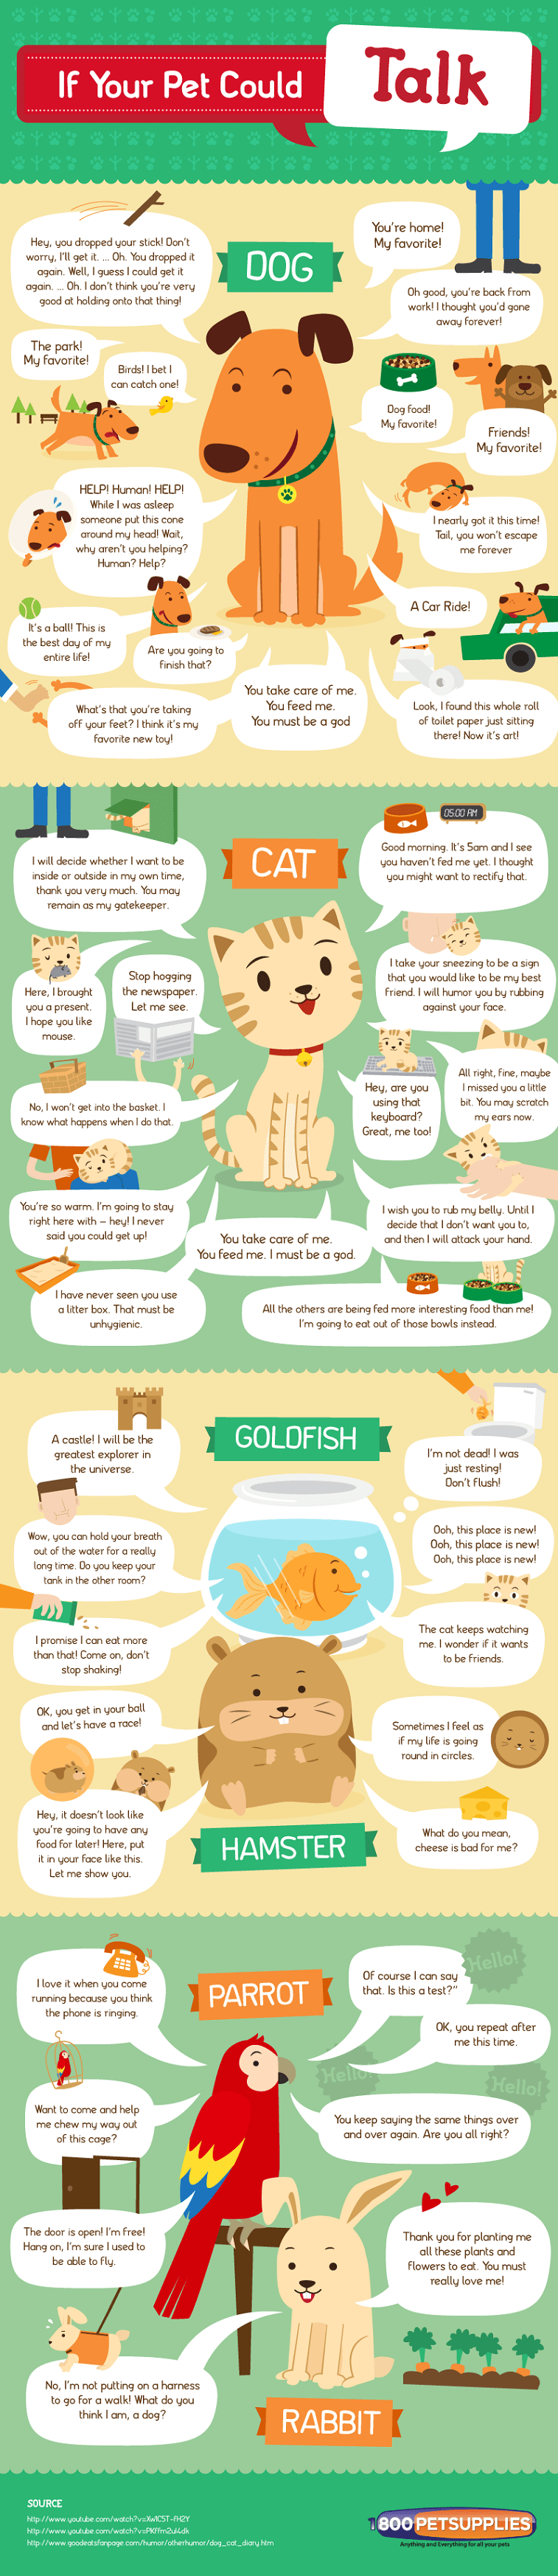 If Your Pet Could Talk | Daily Infographic